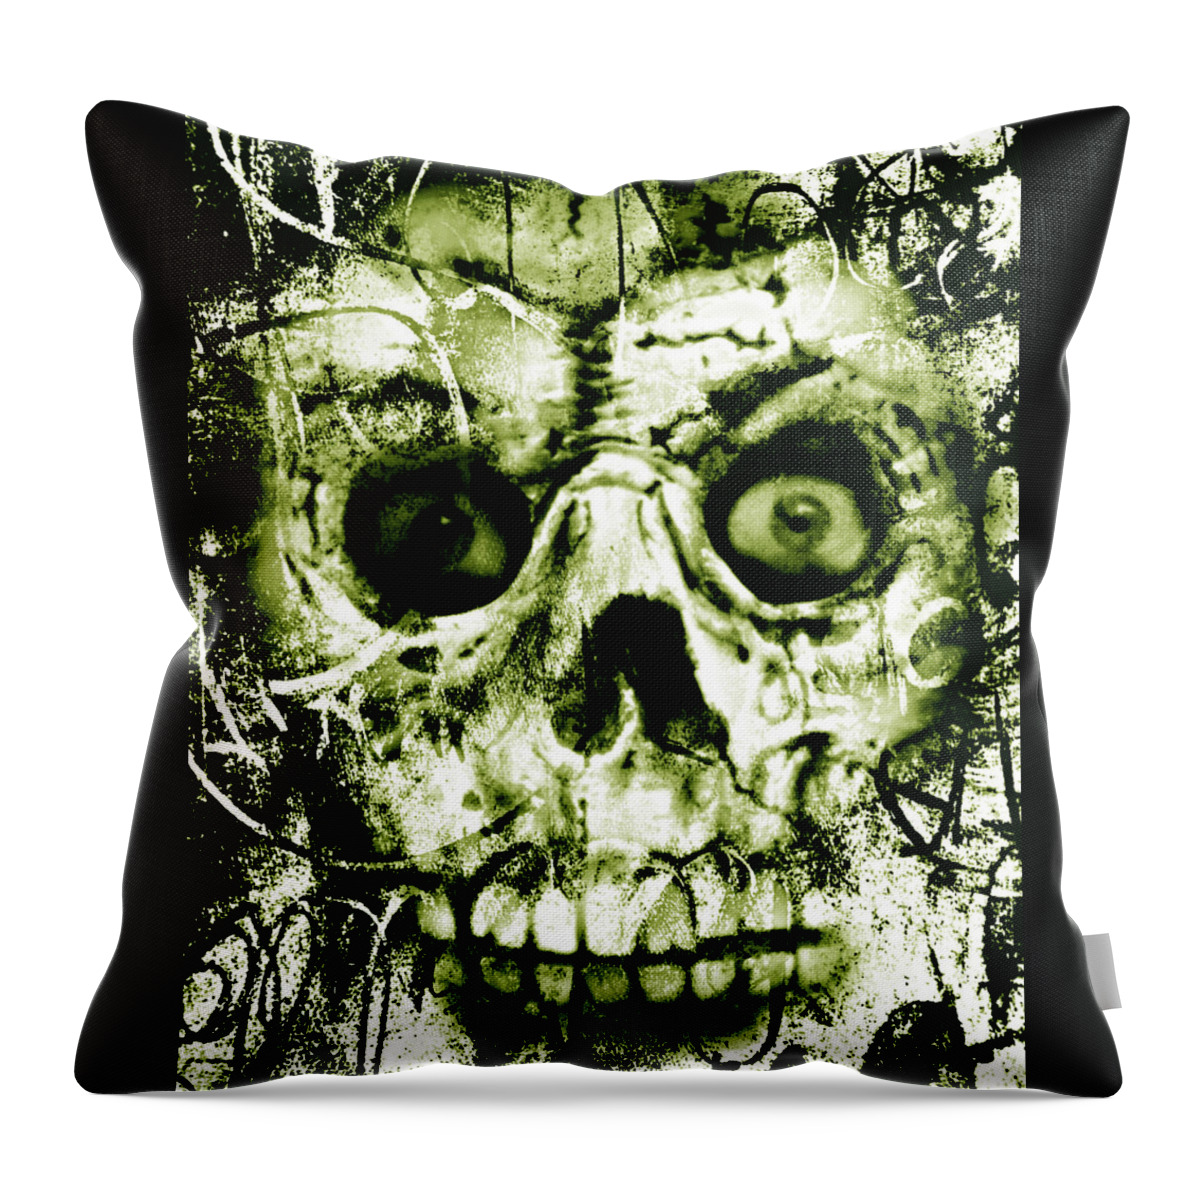 Ghouls Throw Pillow featuring the photograph Ghouls II by Aurelio Zucco